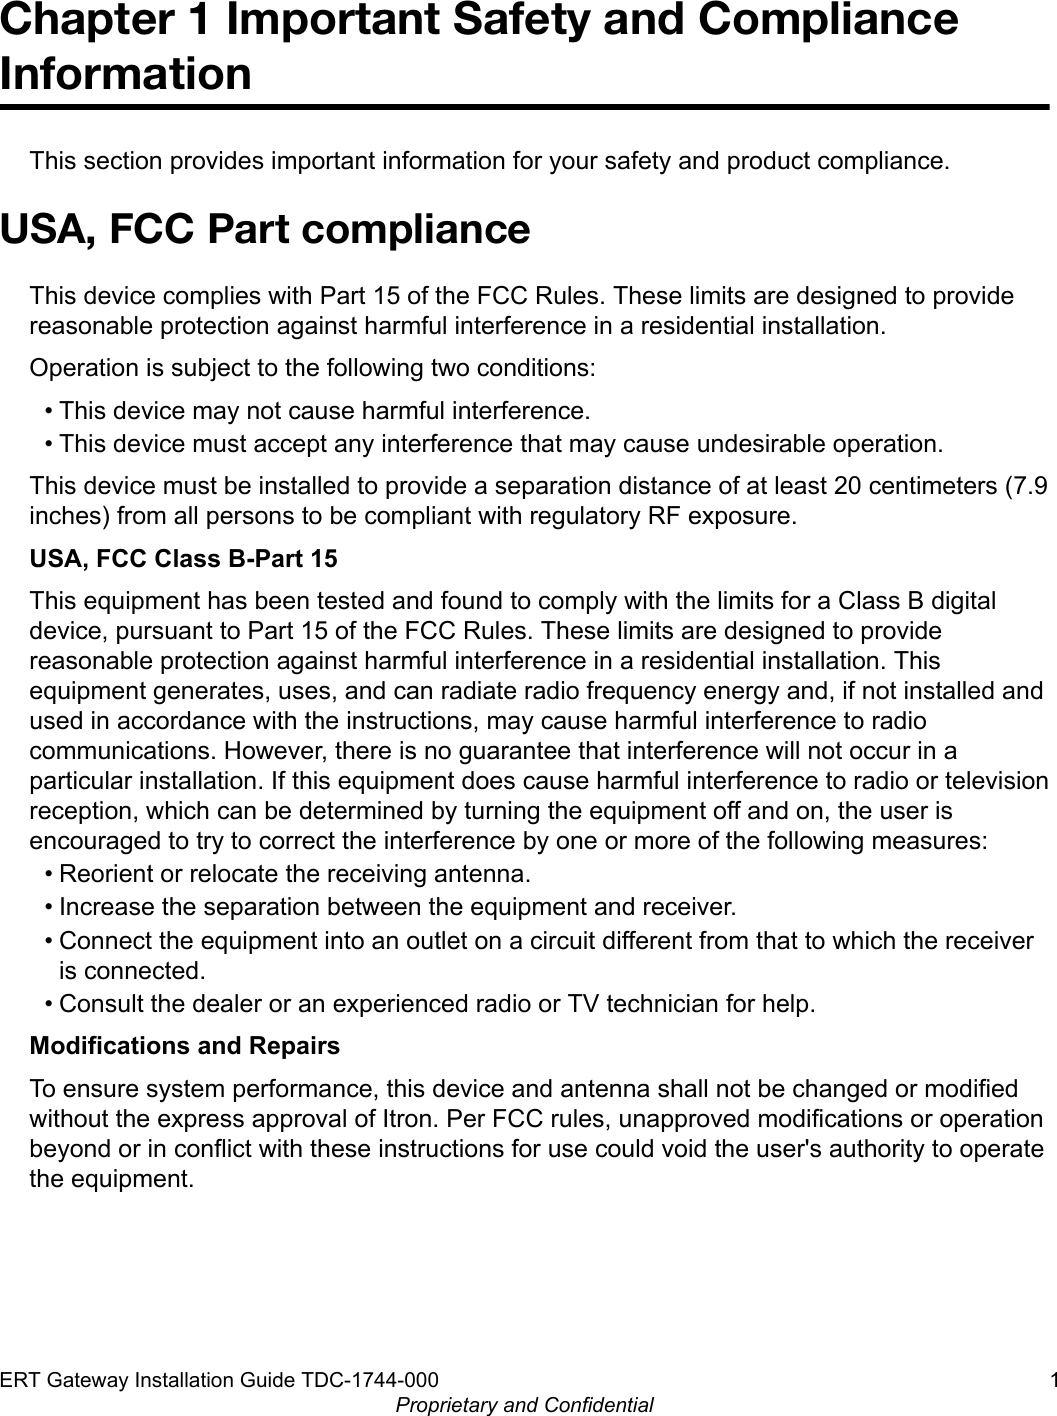 Chapter 1 Important Safety and ComplianceInformationThis section provides important information for your safety and product compliance.USA, FCC Part complianceThis device complies with Part 15 of the FCC Rules. These limits are designed to providereasonable protection against harmful interference in a residential installation.Operation is subject to the following two conditions:• This device may not cause harmful interference.• This device must accept any interference that may cause undesirable operation.This device must be installed to provide a separation distance of at least 20 centimeters (7.9inches) from all persons to be compliant with regulatory RF exposure.USA, FCC Class B-Part 15This equipment has been tested and found to comply with the limits for a Class B digitaldevice, pursuant to Part 15 of the FCC Rules. These limits are designed to providereasonable protection against harmful interference in a residential installation. Thisequipment generates, uses, and can radiate radio frequency energy and, if not installed andused in accordance with the instructions, may cause harmful interference to radiocommunications. However, there is no guarantee that interference will not occur in aparticular installation. If this equipment does cause harmful interference to radio or televisionreception, which can be determined by turning the equipment off and on, the user isencouraged to try to correct the interference by one or more of the following measures:• Reorient or relocate the receiving antenna.• Increase the separation between the equipment and receiver.• Connect the equipment into an outlet on a circuit different from that to which the receiveris connected.• Consult the dealer or an experienced radio or TV technician for help.Modifications and RepairsTo ensure system performance, this device and antenna shall not be changed or modifiedwithout the express approval of Itron. Per FCC rules, unapproved modifications or operationbeyond or in conflict with these instructions for use could void the user&apos;s authority to operatethe equipment.ERT Gateway Installation Guide TDC-1744-000 1Proprietary and Confidential